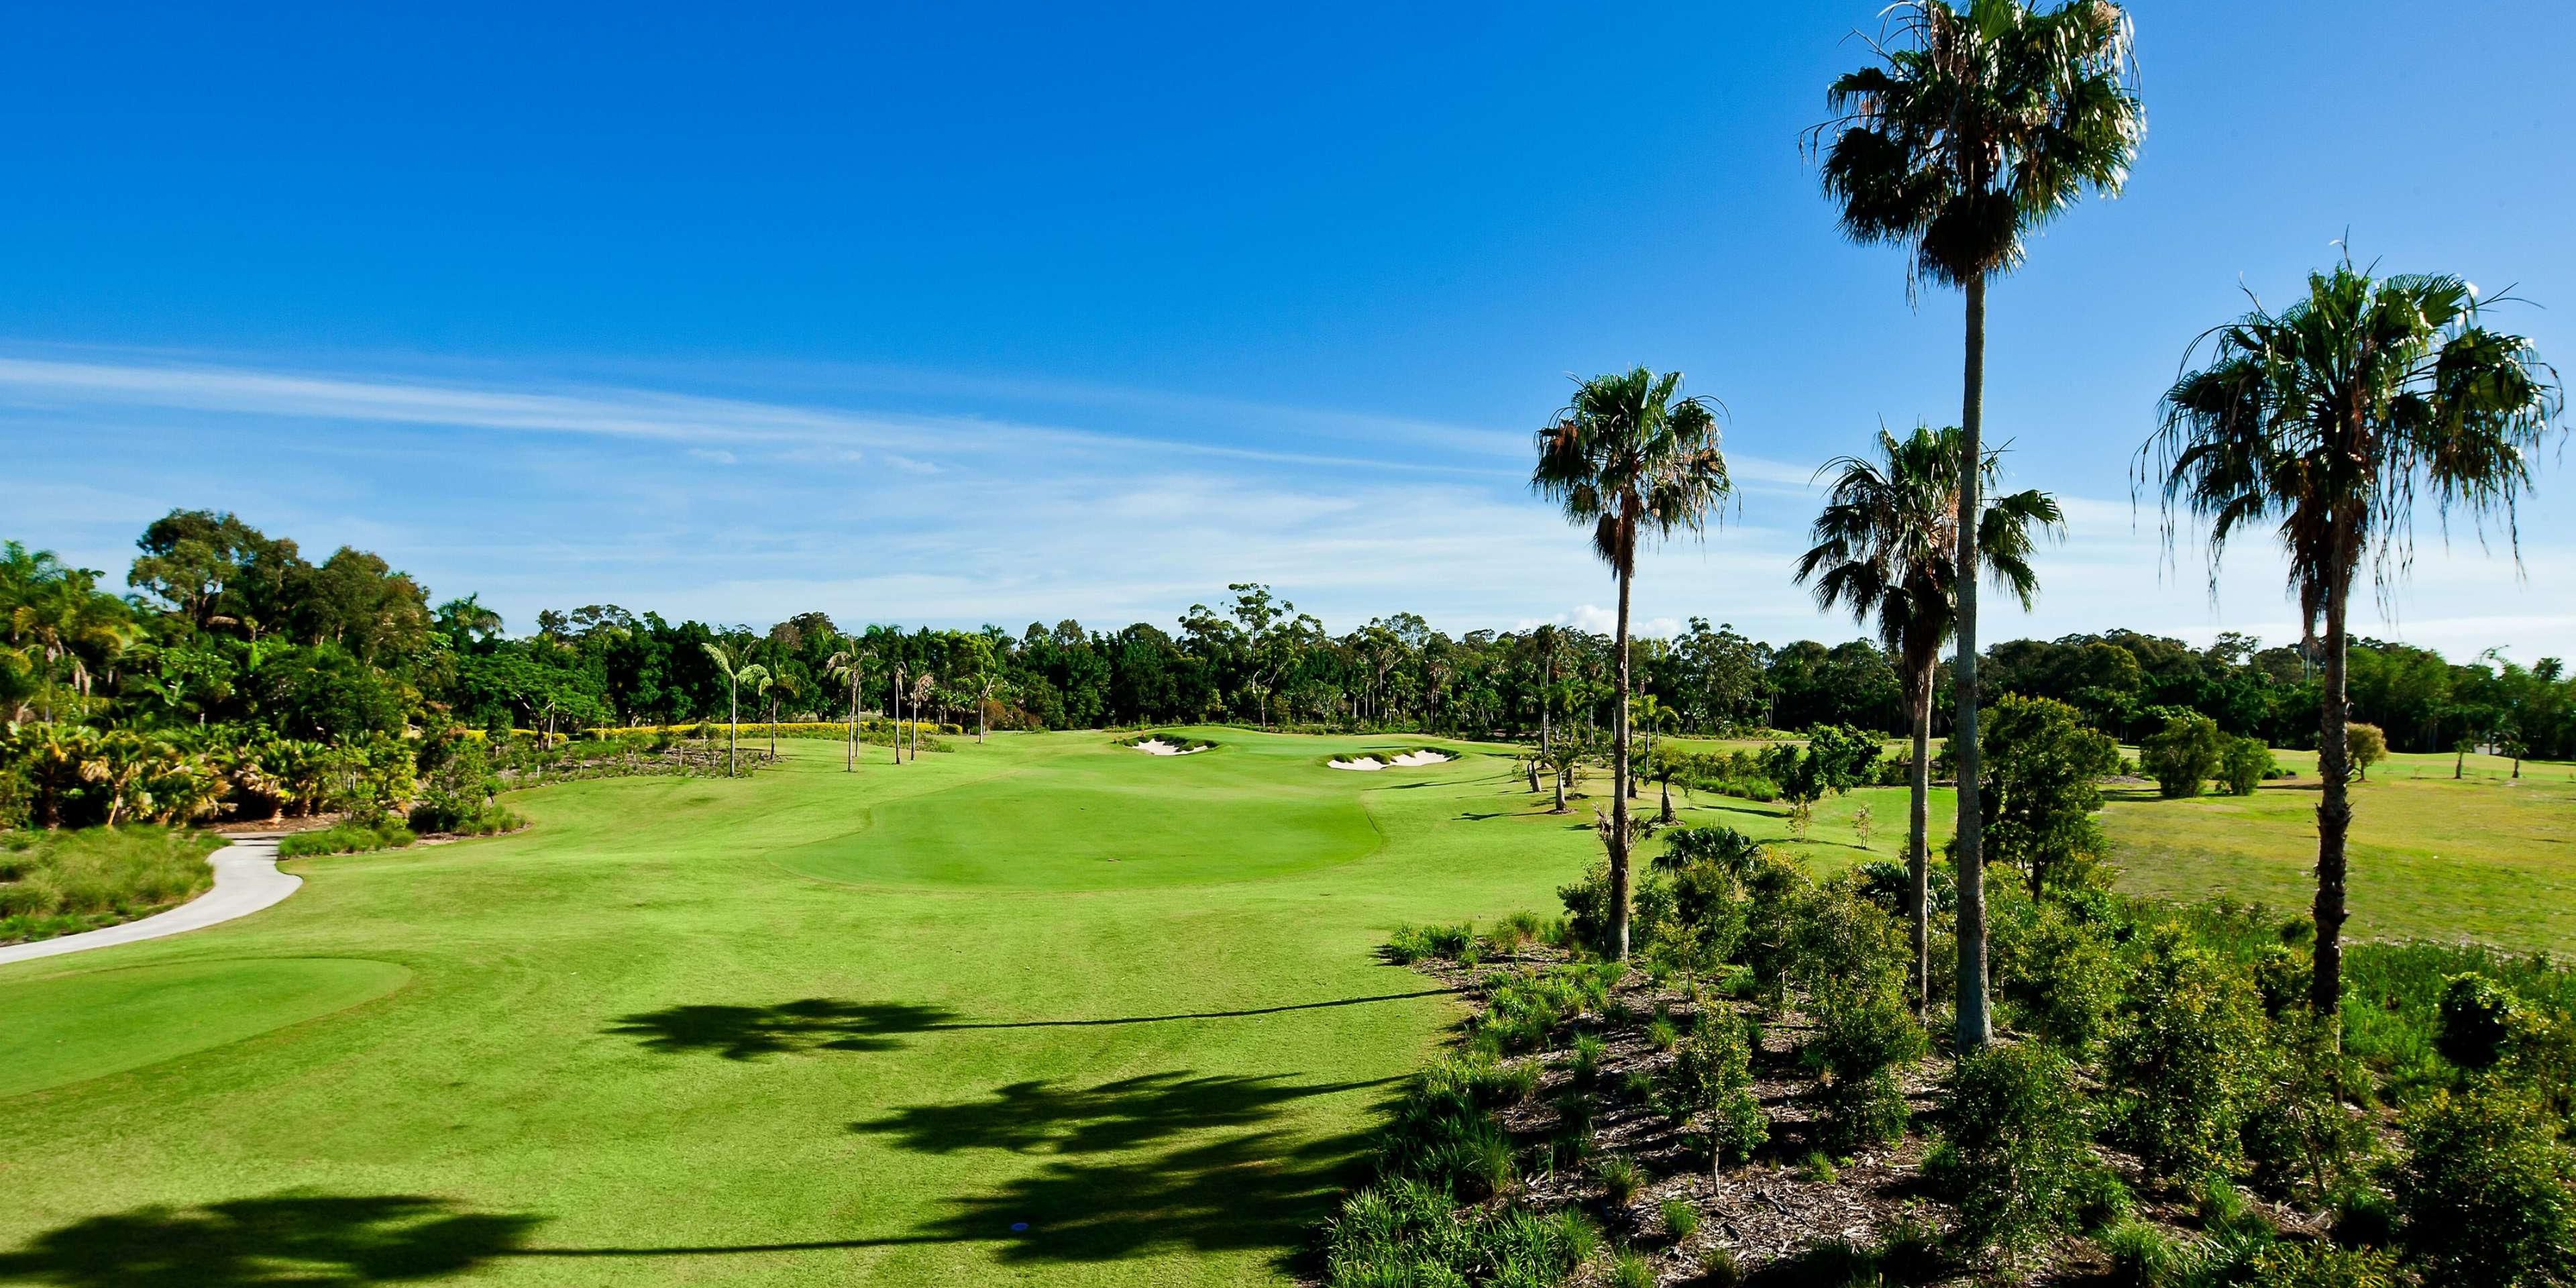 Celebrated as one of Australia’s most iconic golfing destinations, Sanctuary Cove is home to the critically acclaimed The Palms and The Pines golf courses. Both courses are exclusive to members but guests of InterContinental Sanctuary Cove Resort have the luxury of access to these world-class Golf Courses.